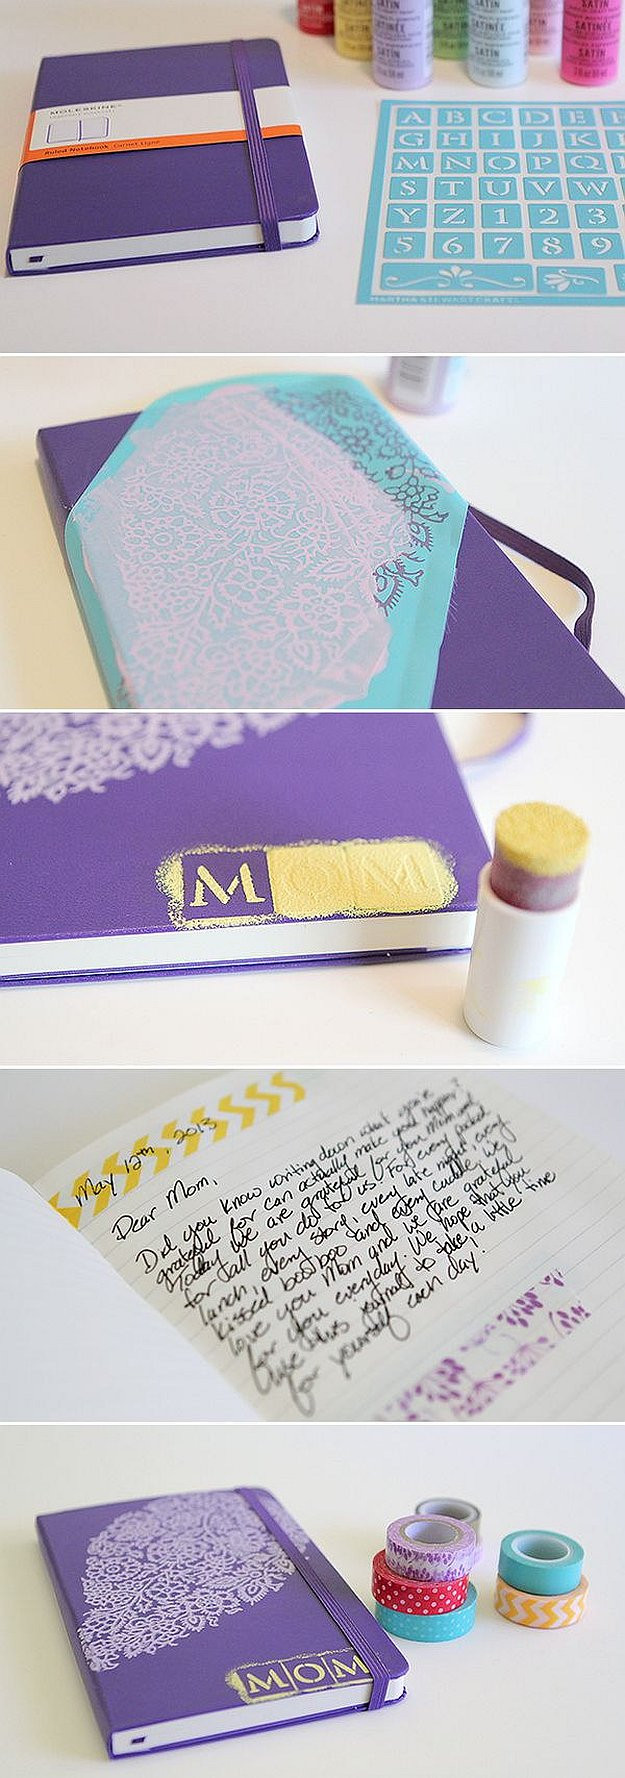 Birthday Gifts For Mother
 10 DIY Birthday Gift Ideas for Mom DIY Ready